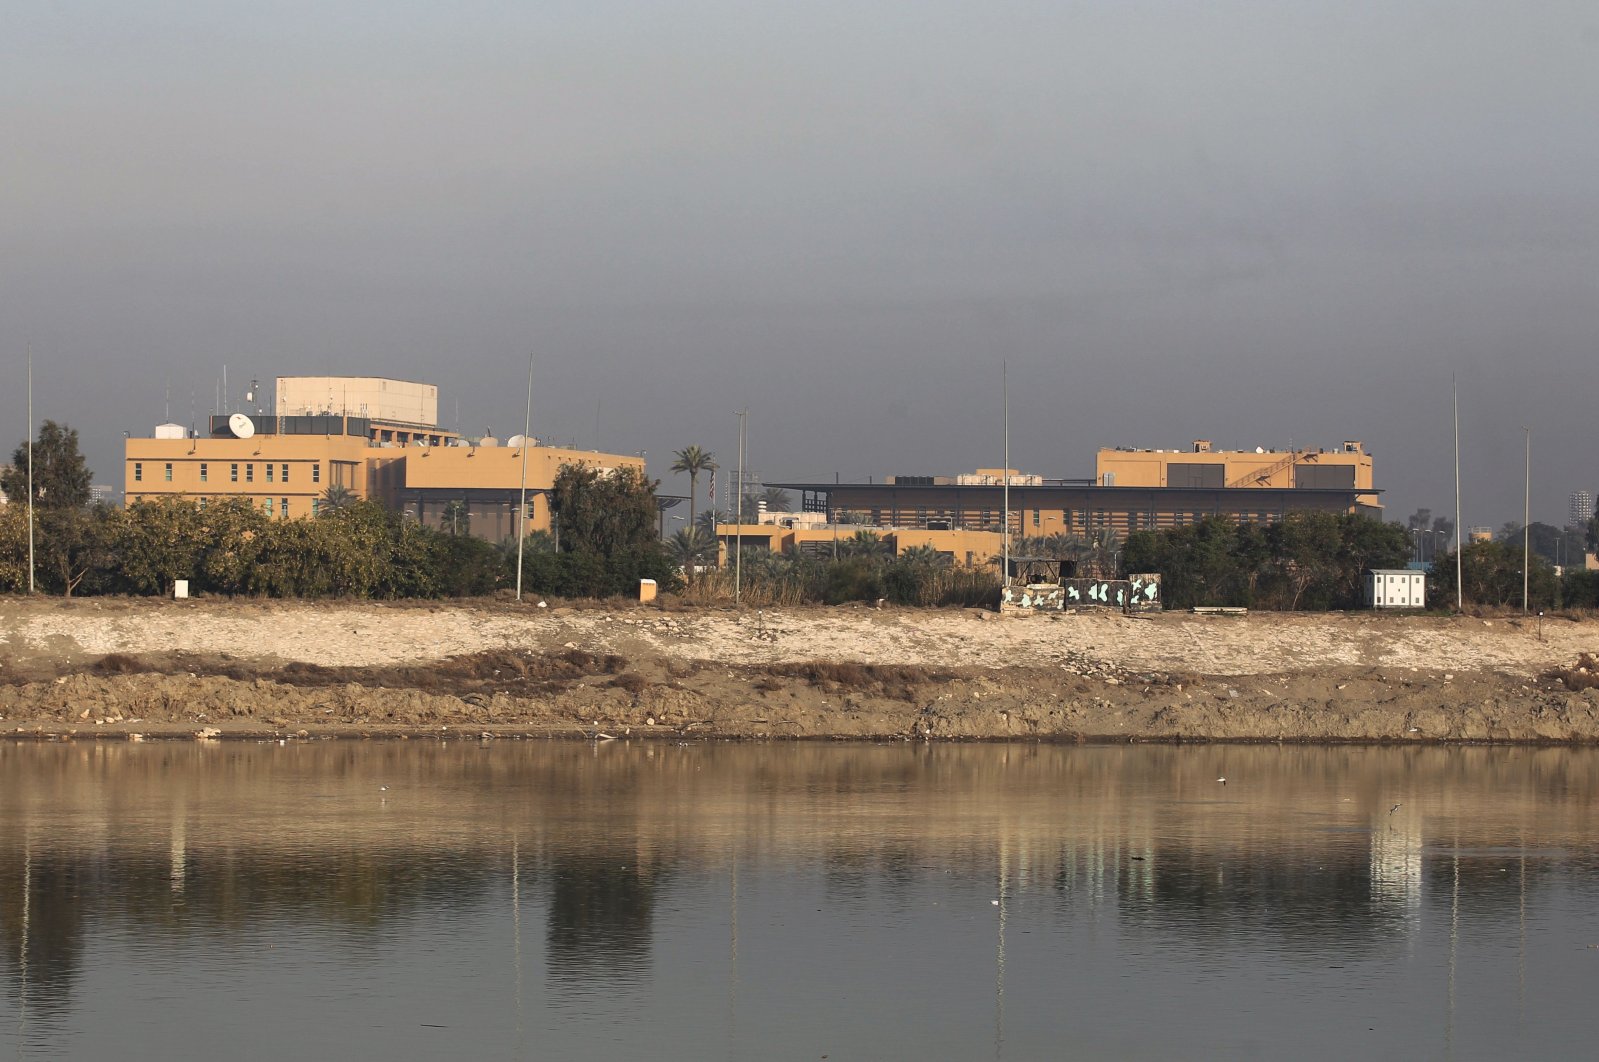 A general view of the U.S. Embassy across the Tigris river in Iraq's capital Baghdad, Jan. 3, 2020. (AFP Photo)